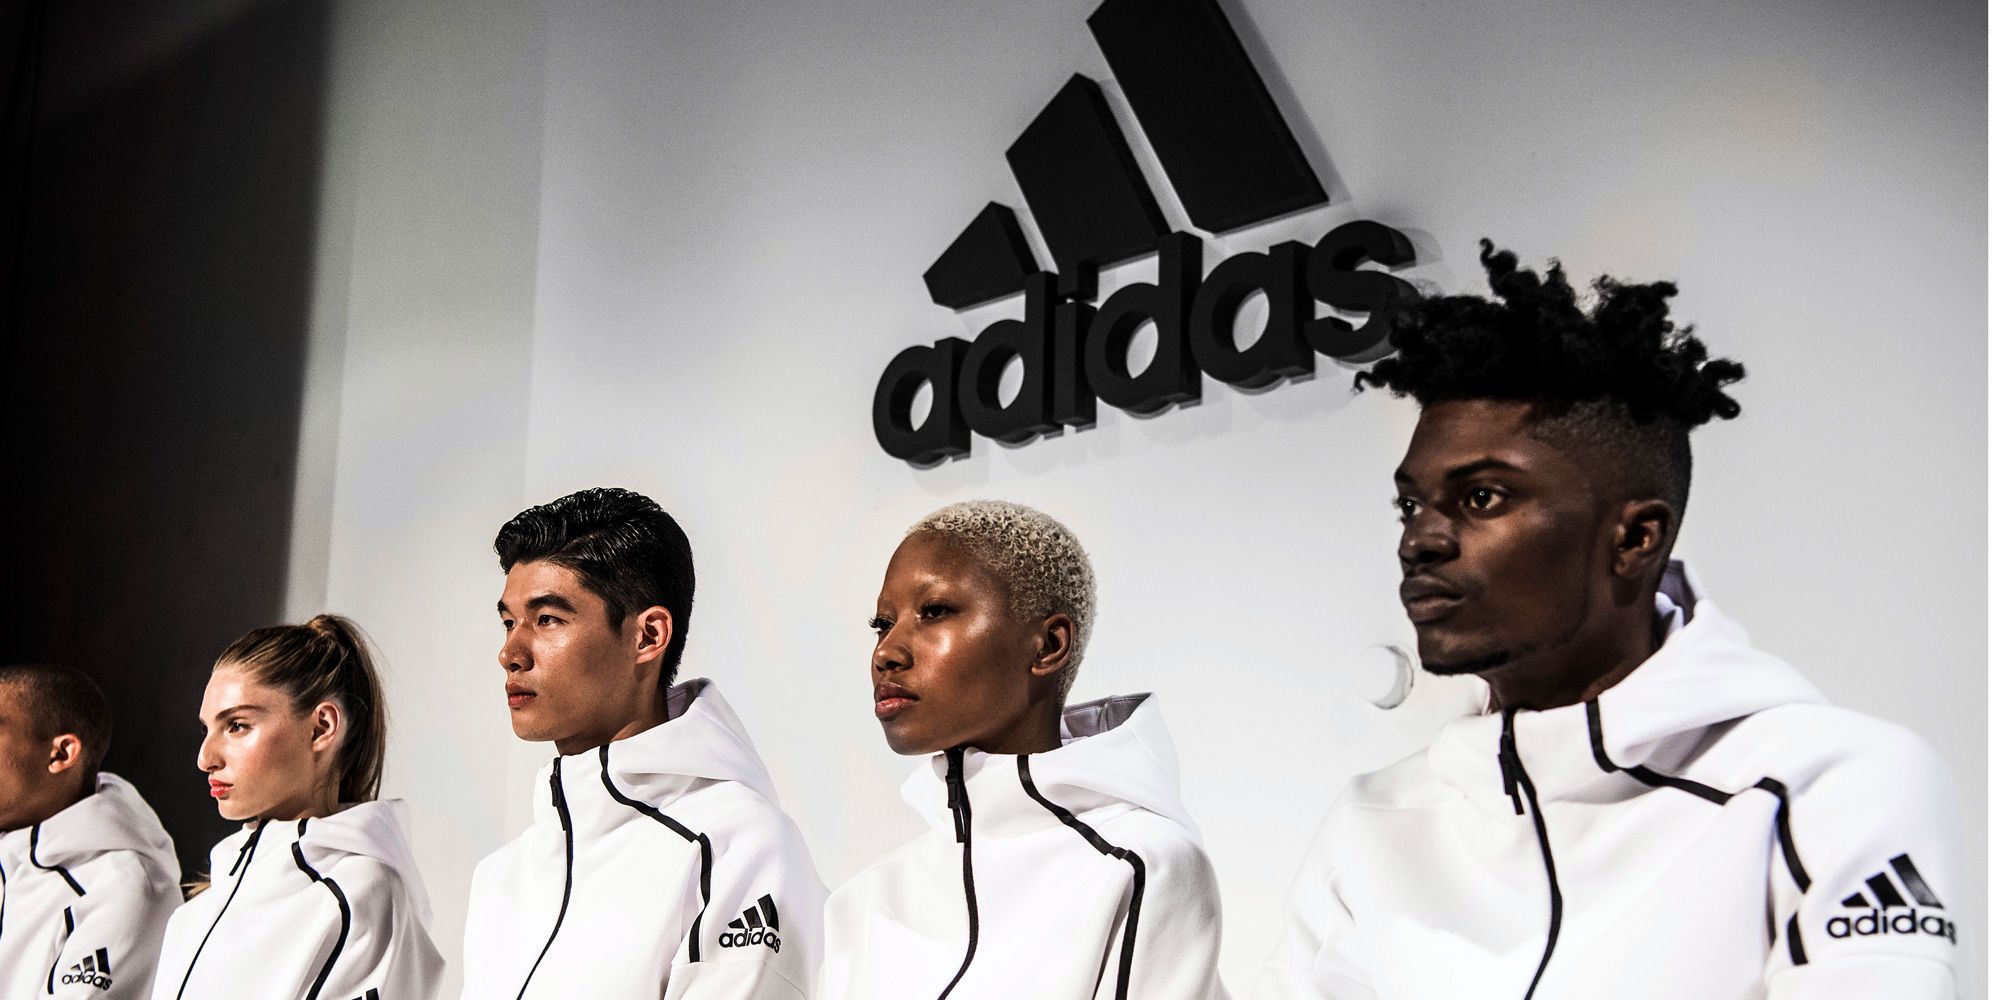 Adidas' New Clothing Line Blends Style 